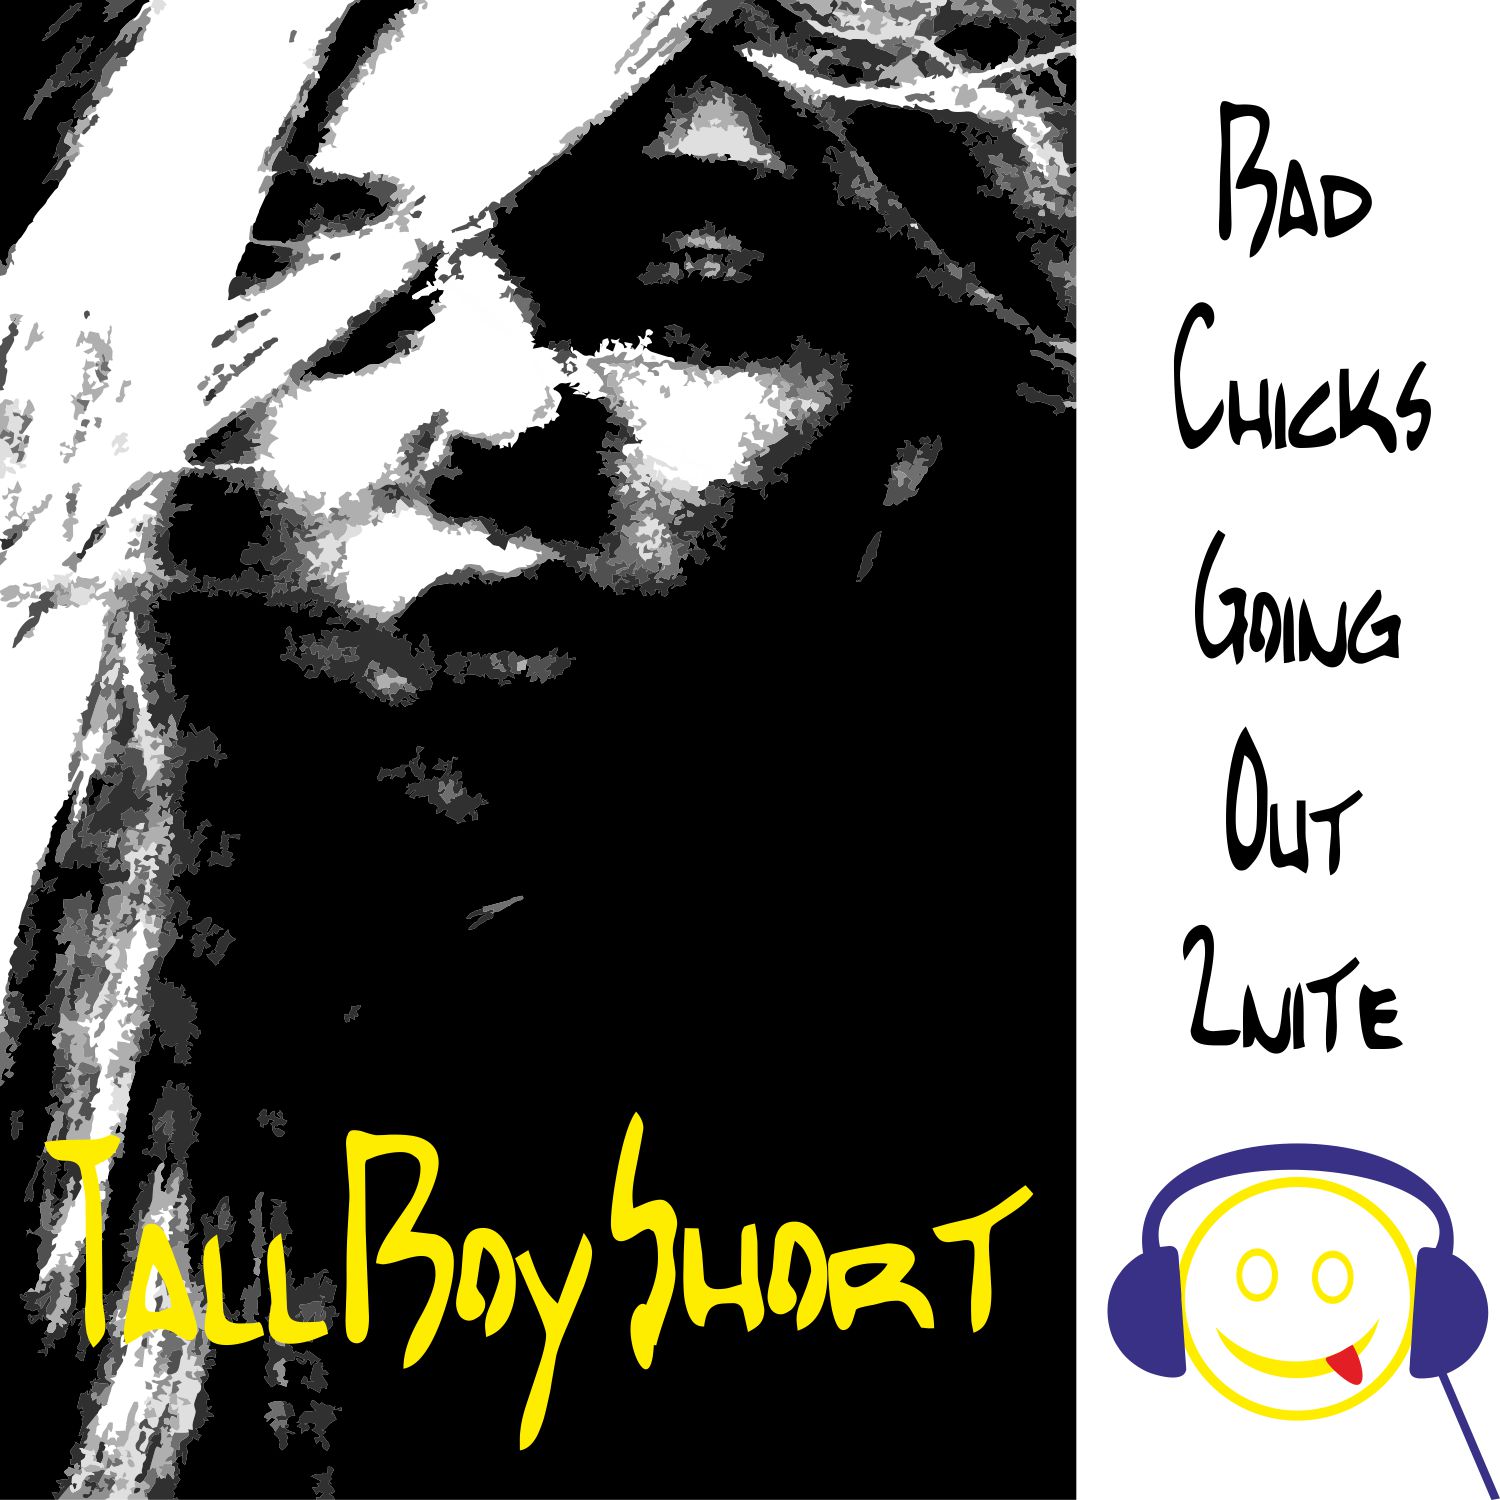 TallBoyShort TBS - Bad Chicks Going Out 2nite